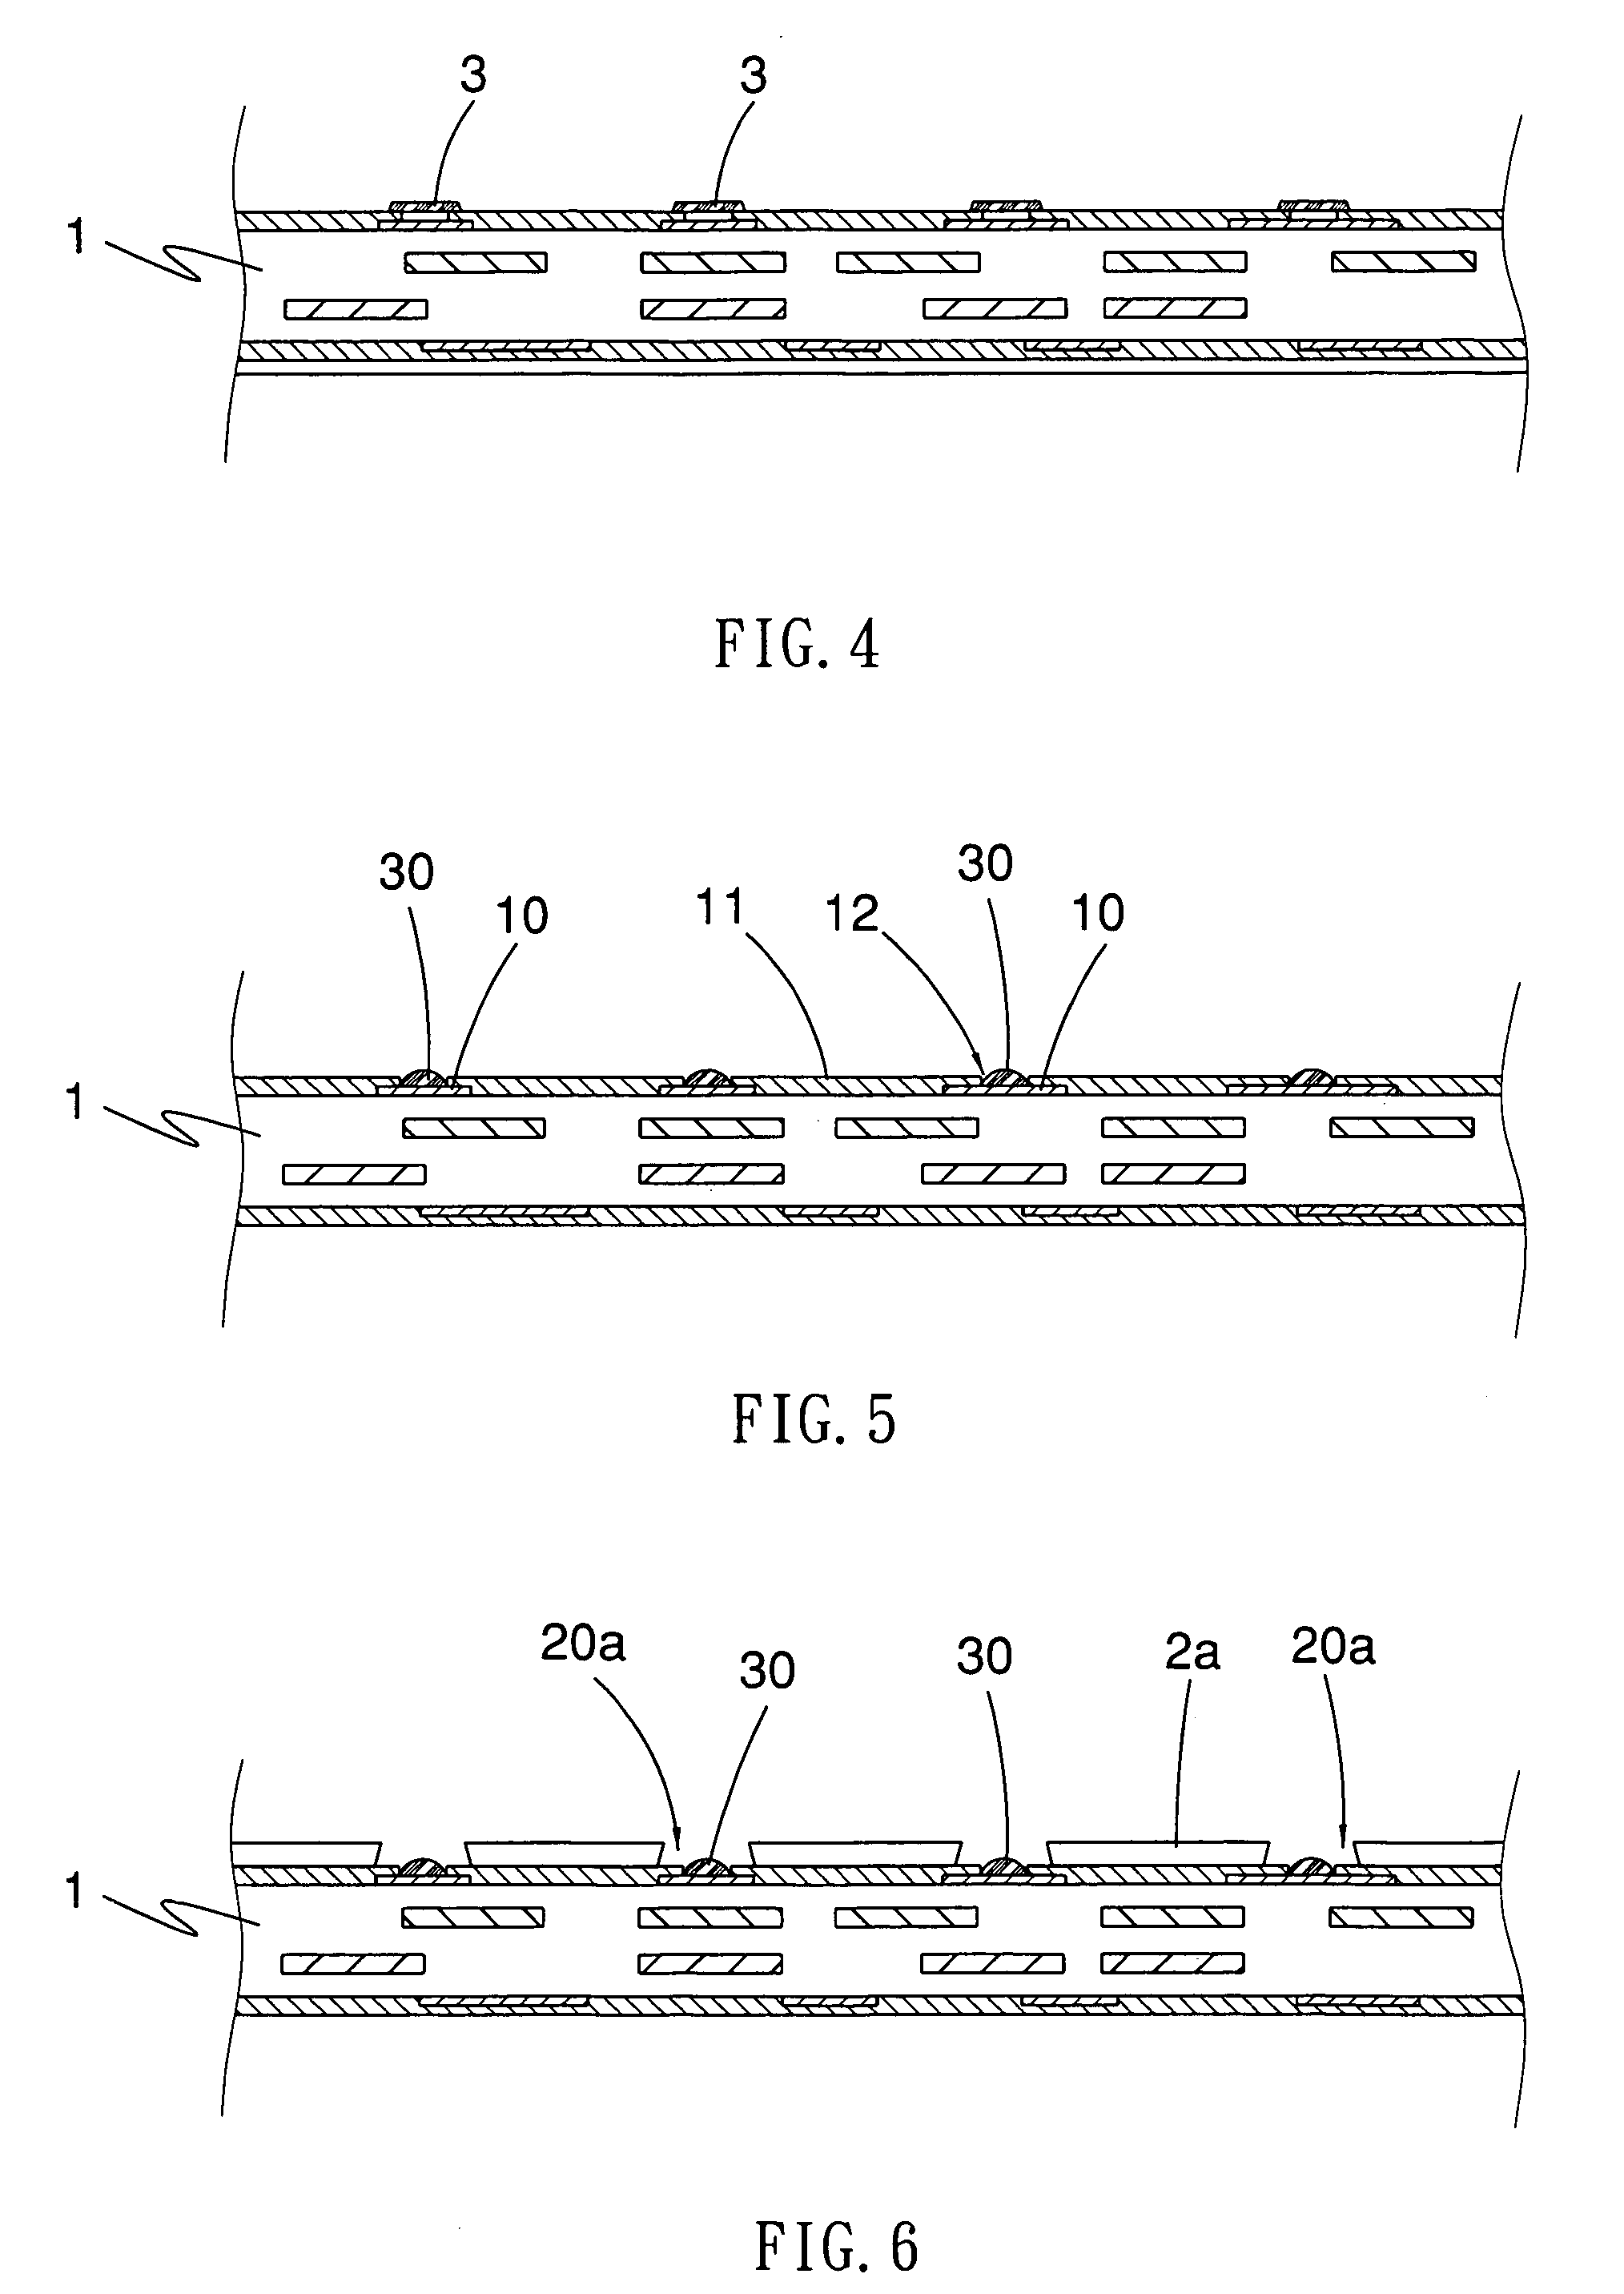 Method for forming heightened solder bumps on circuit boards